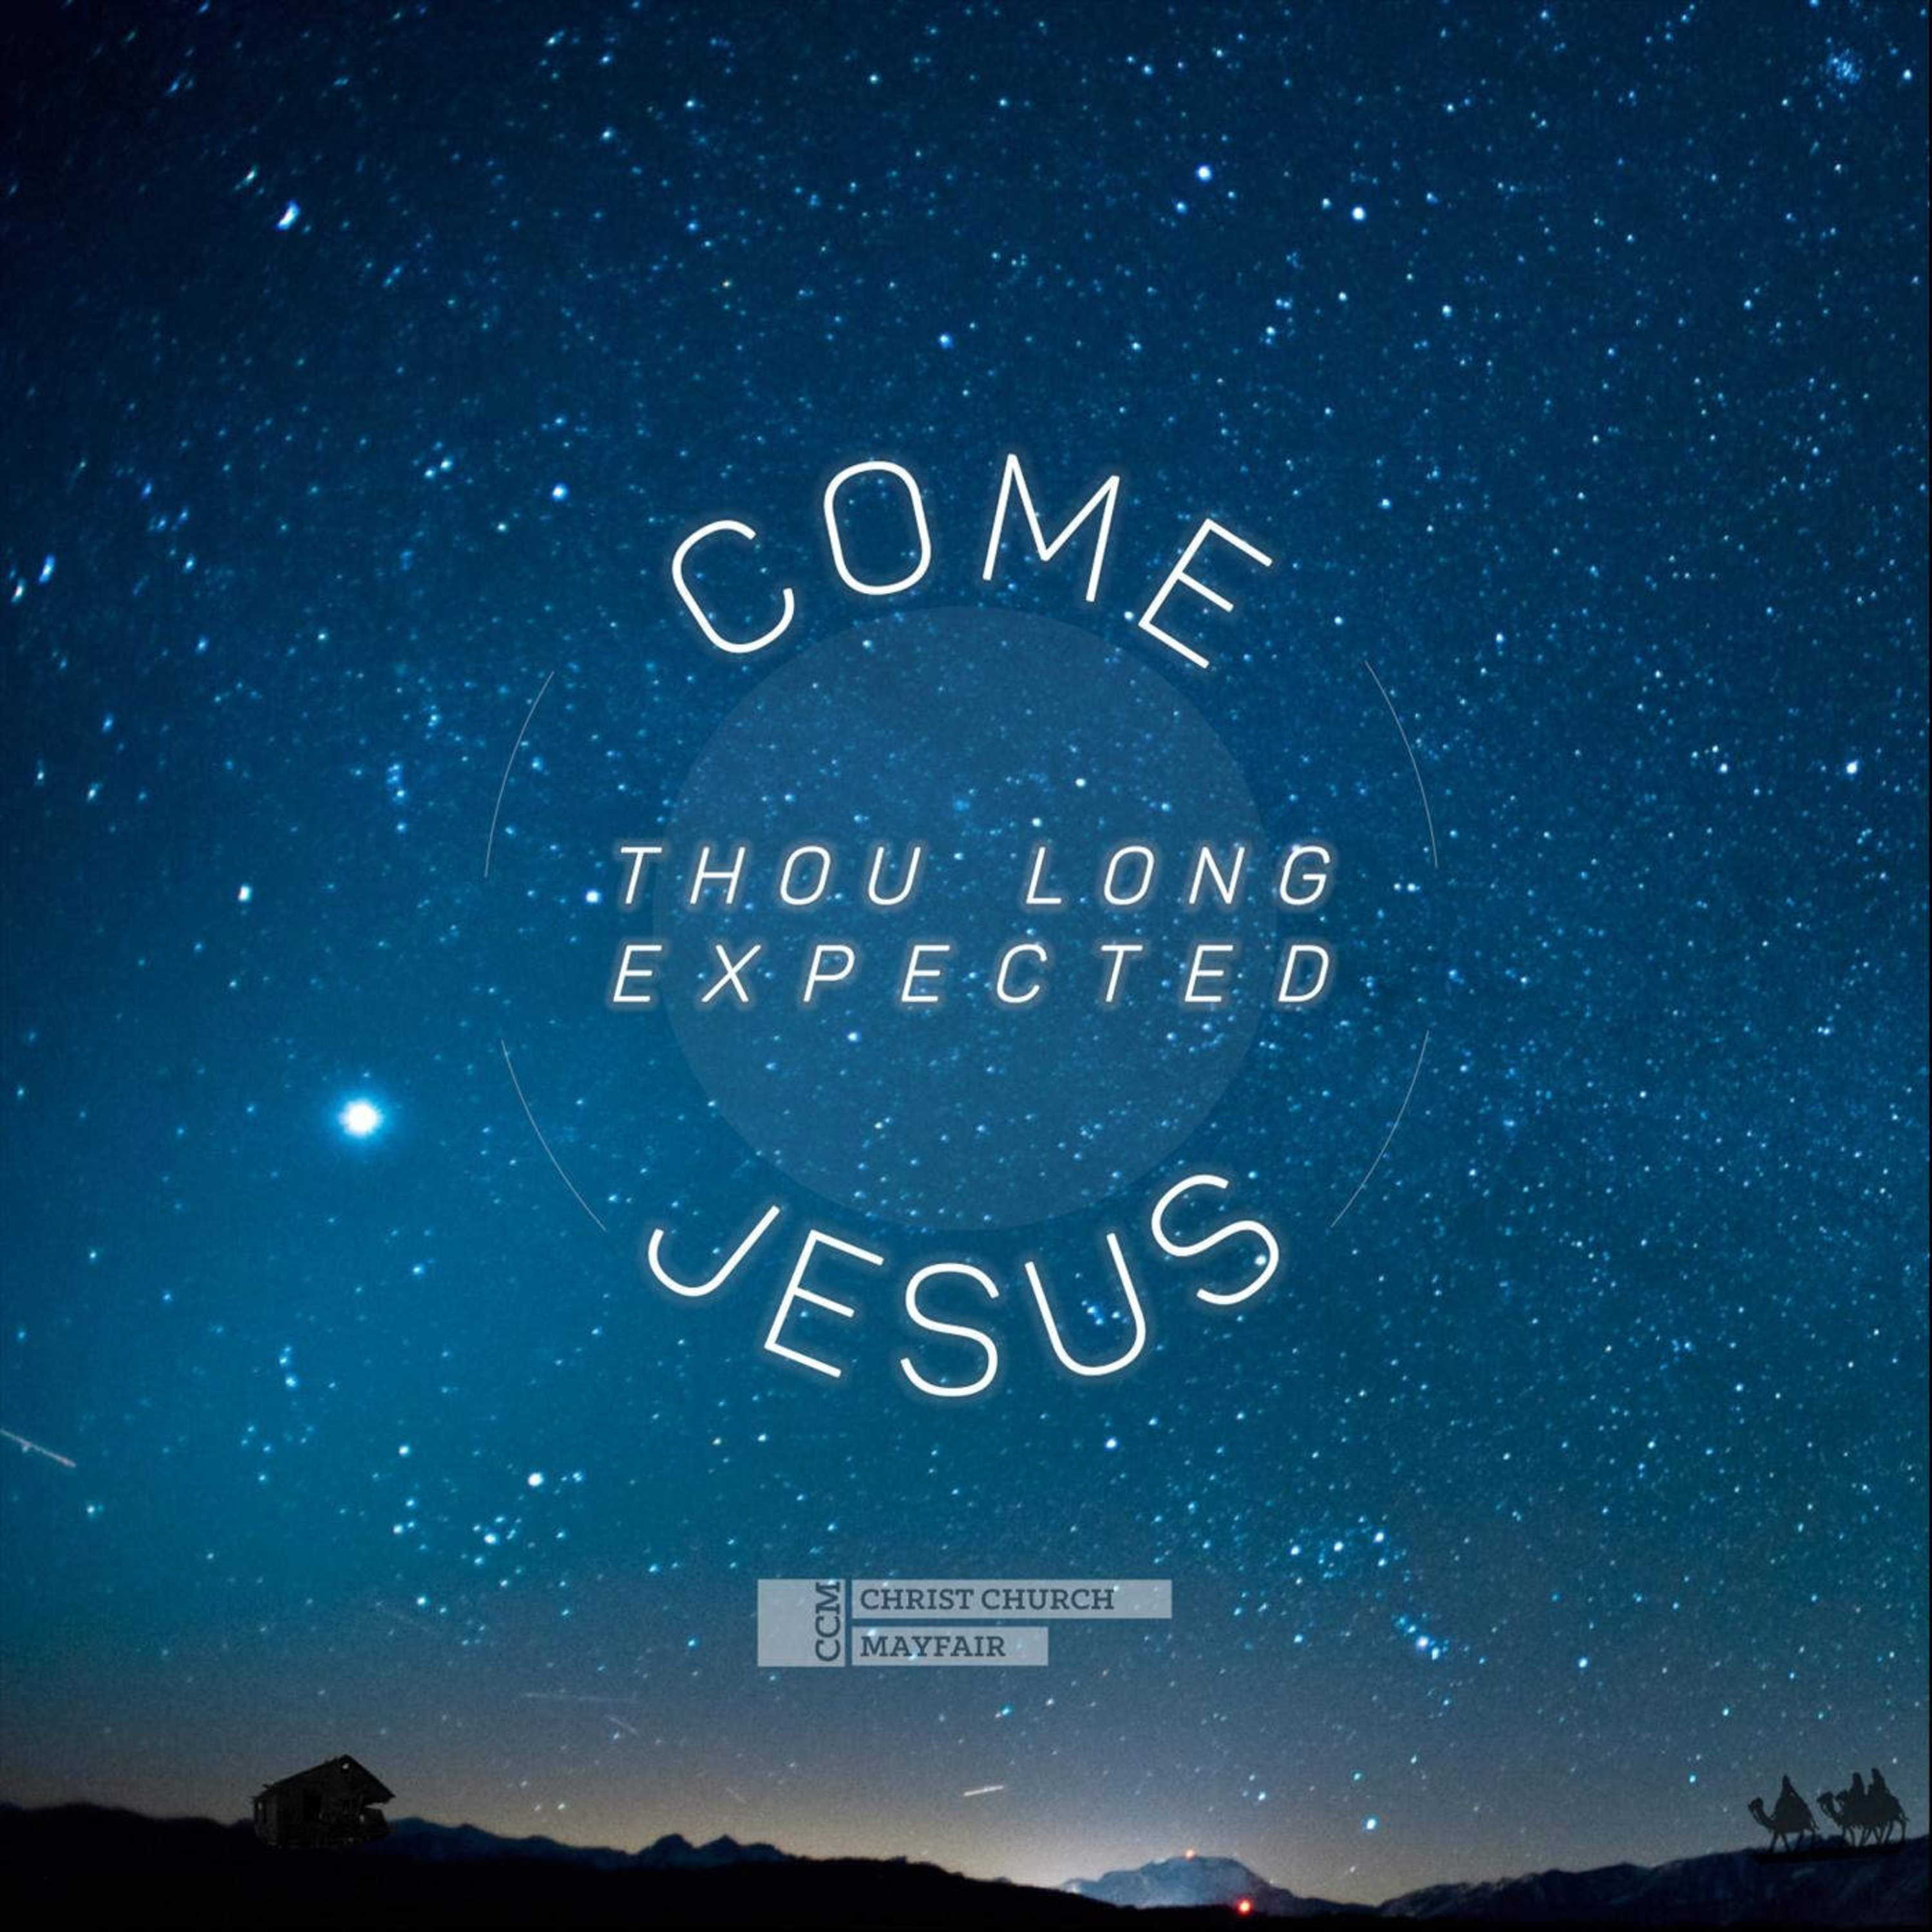 Come Thou Long Expected Jesus cover image